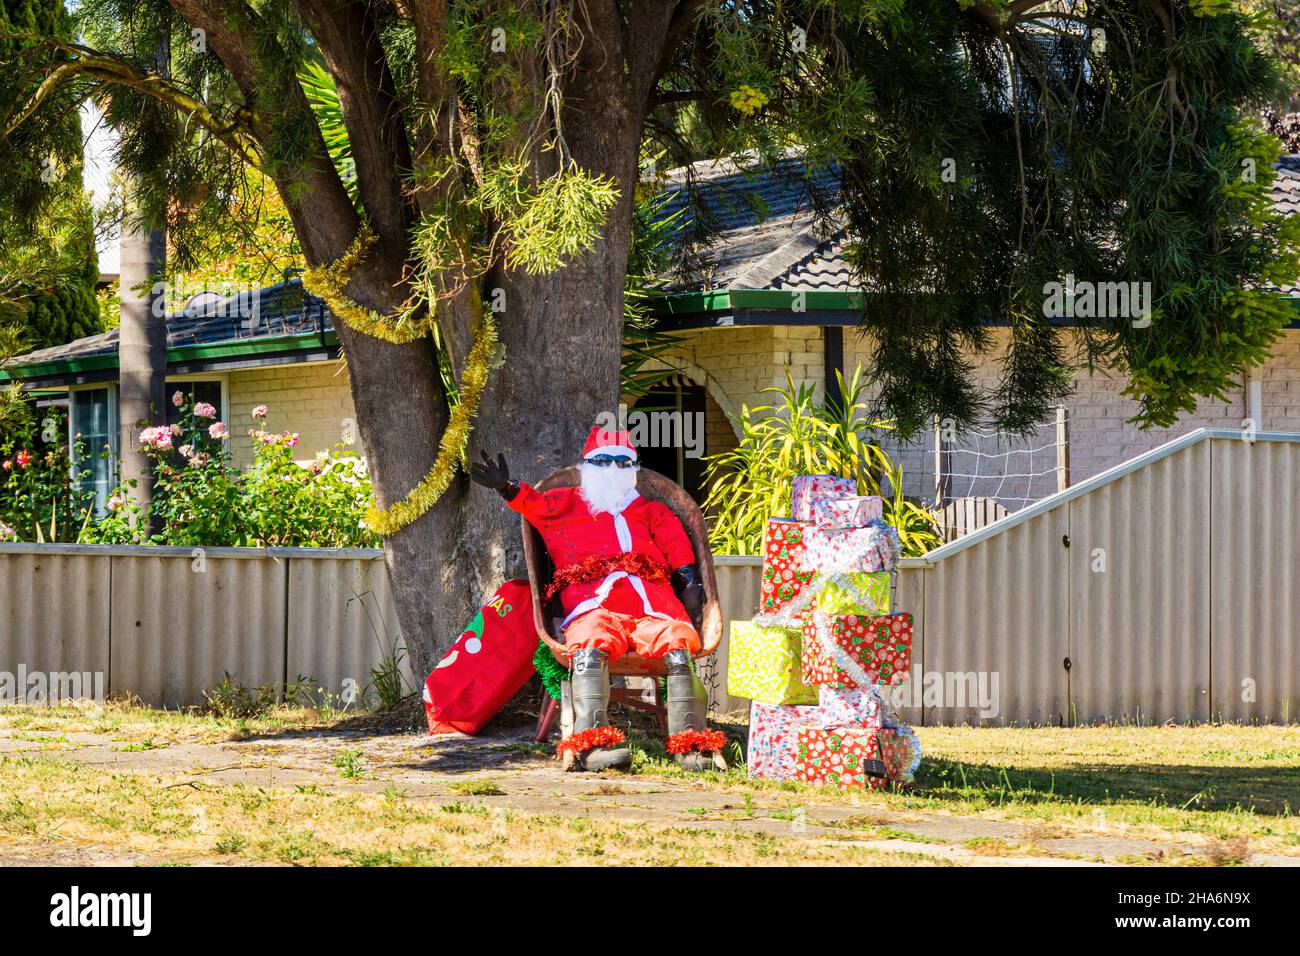 Christmas decorations of Father Christmas in various settings line the road through the rural country town of Kirup, Western Australia, Australia Stock Photo